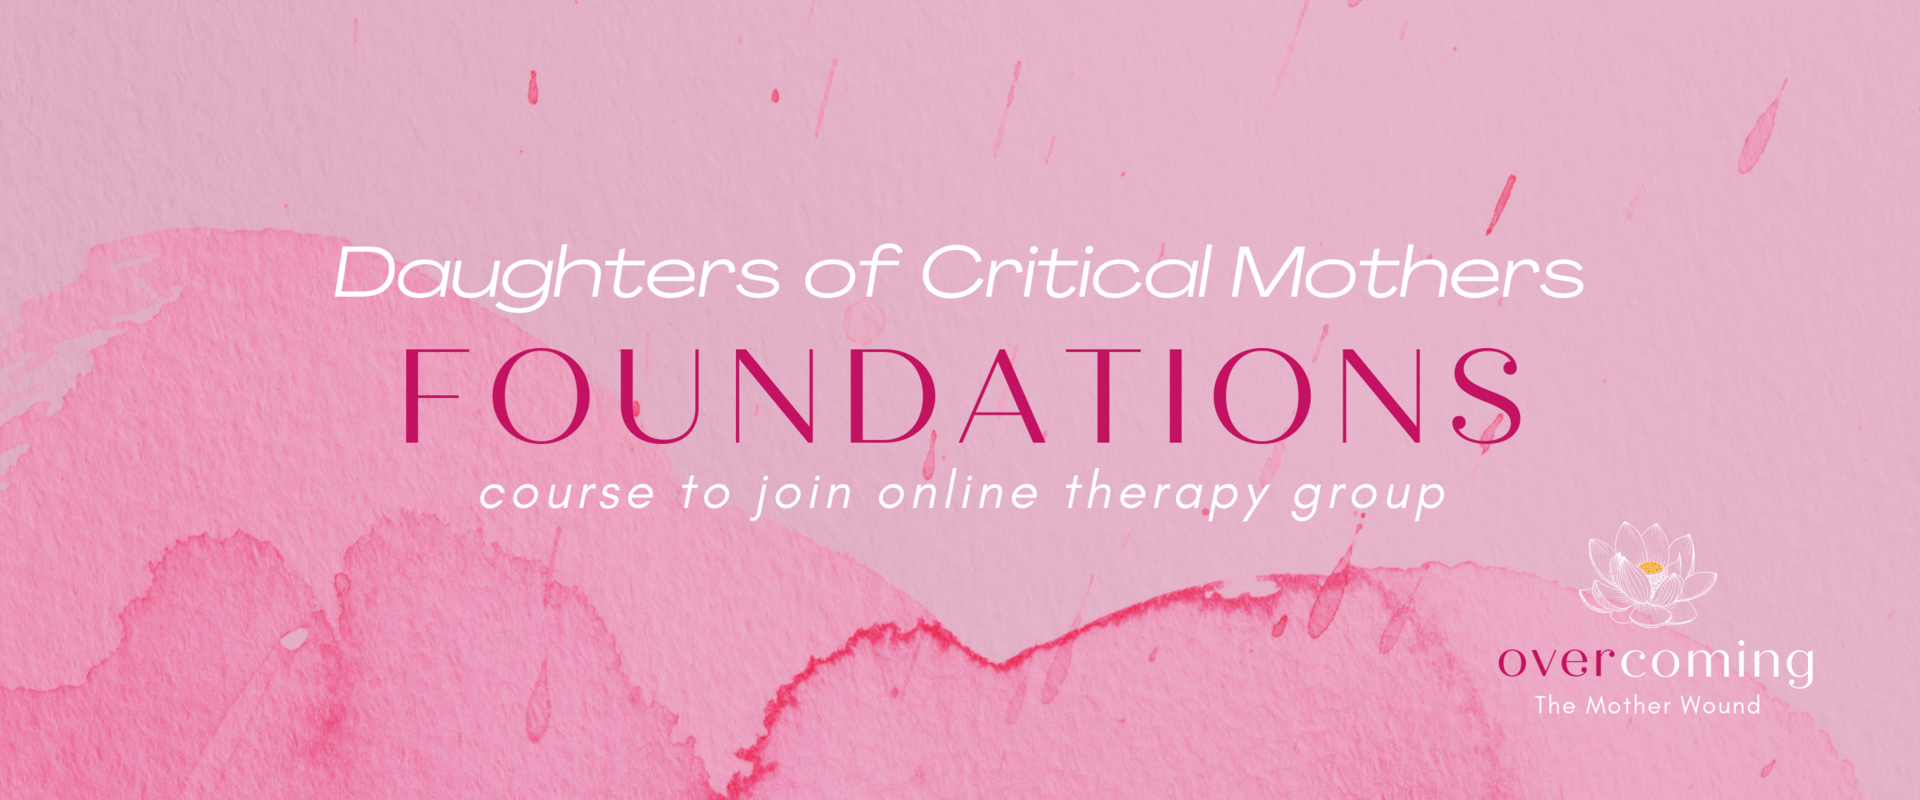 Daughters of Critical Mothers Foundations Course